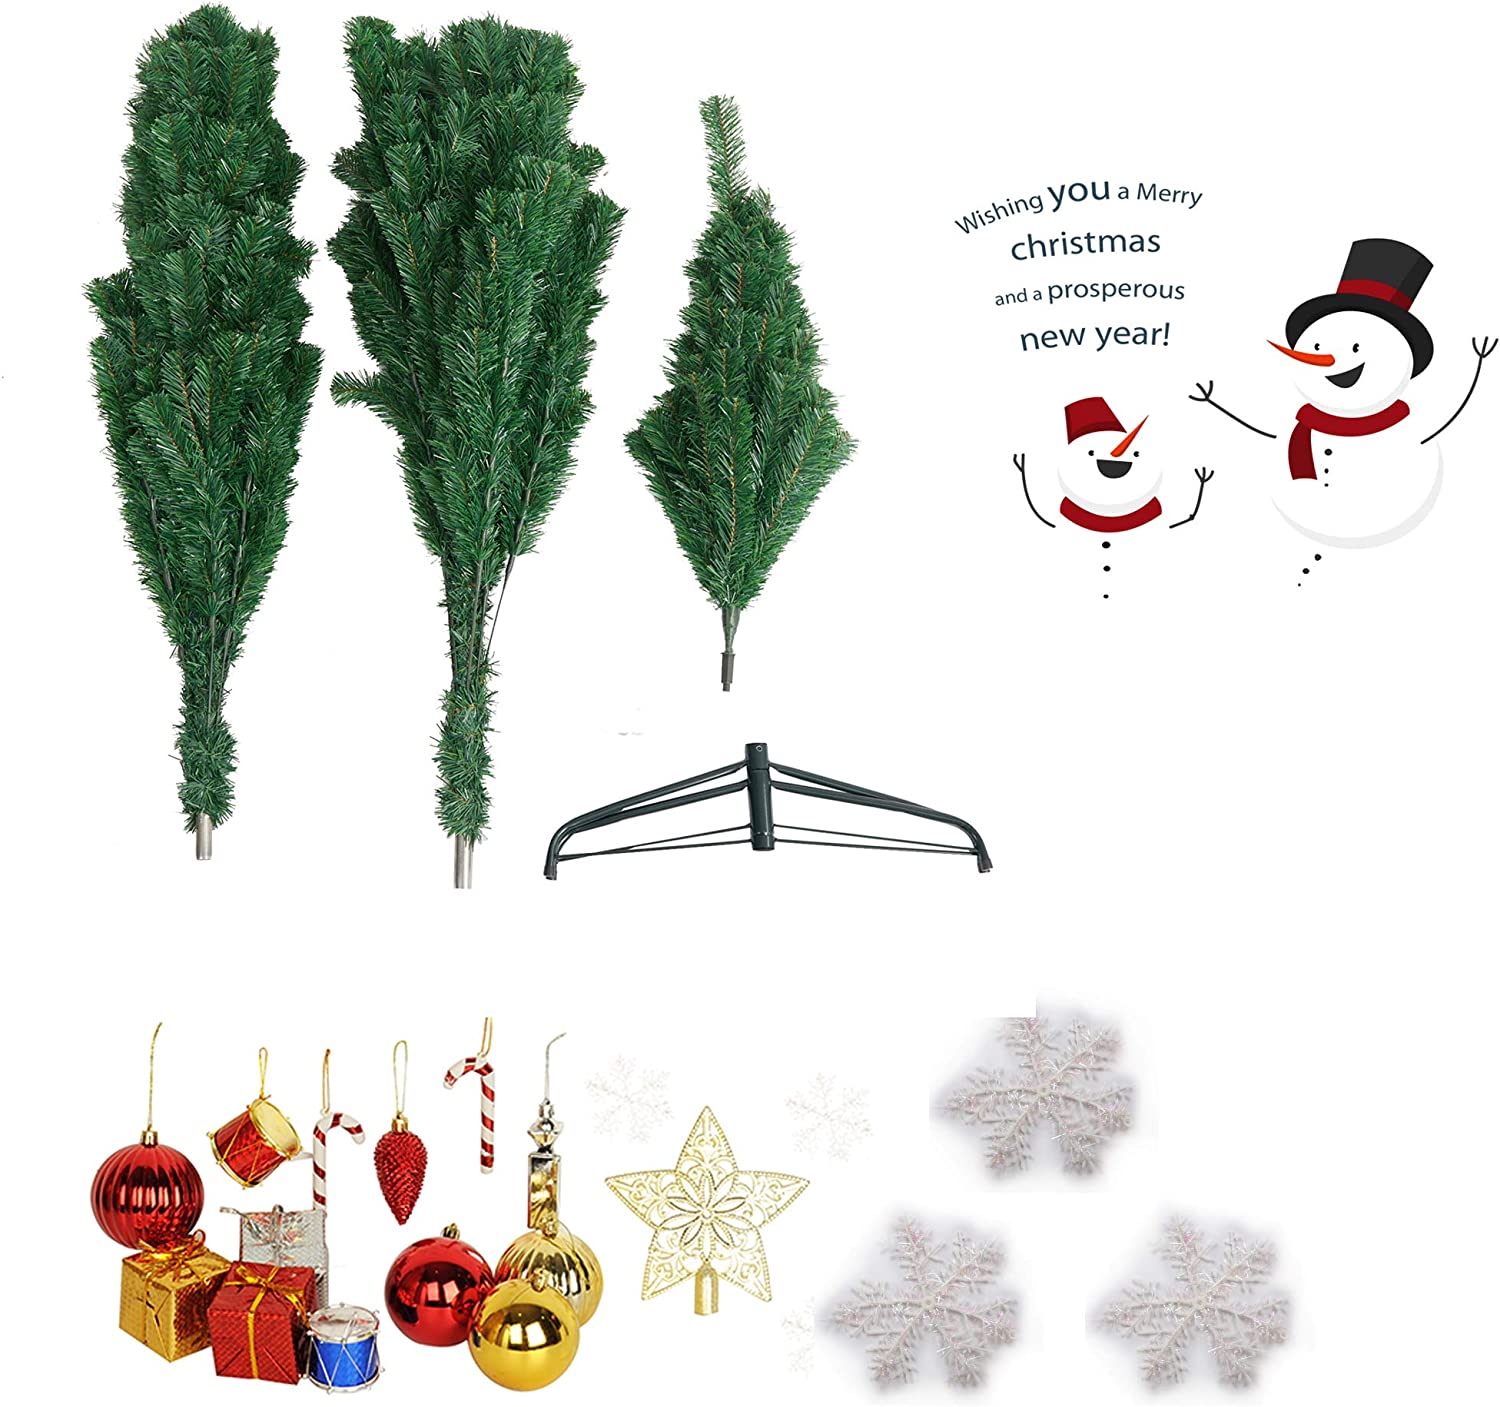 7' Christmas Pine Tree Artificial Fake Xmas Tree with Solid Metal Stand and Decoration for Festival Party Holiday, Green